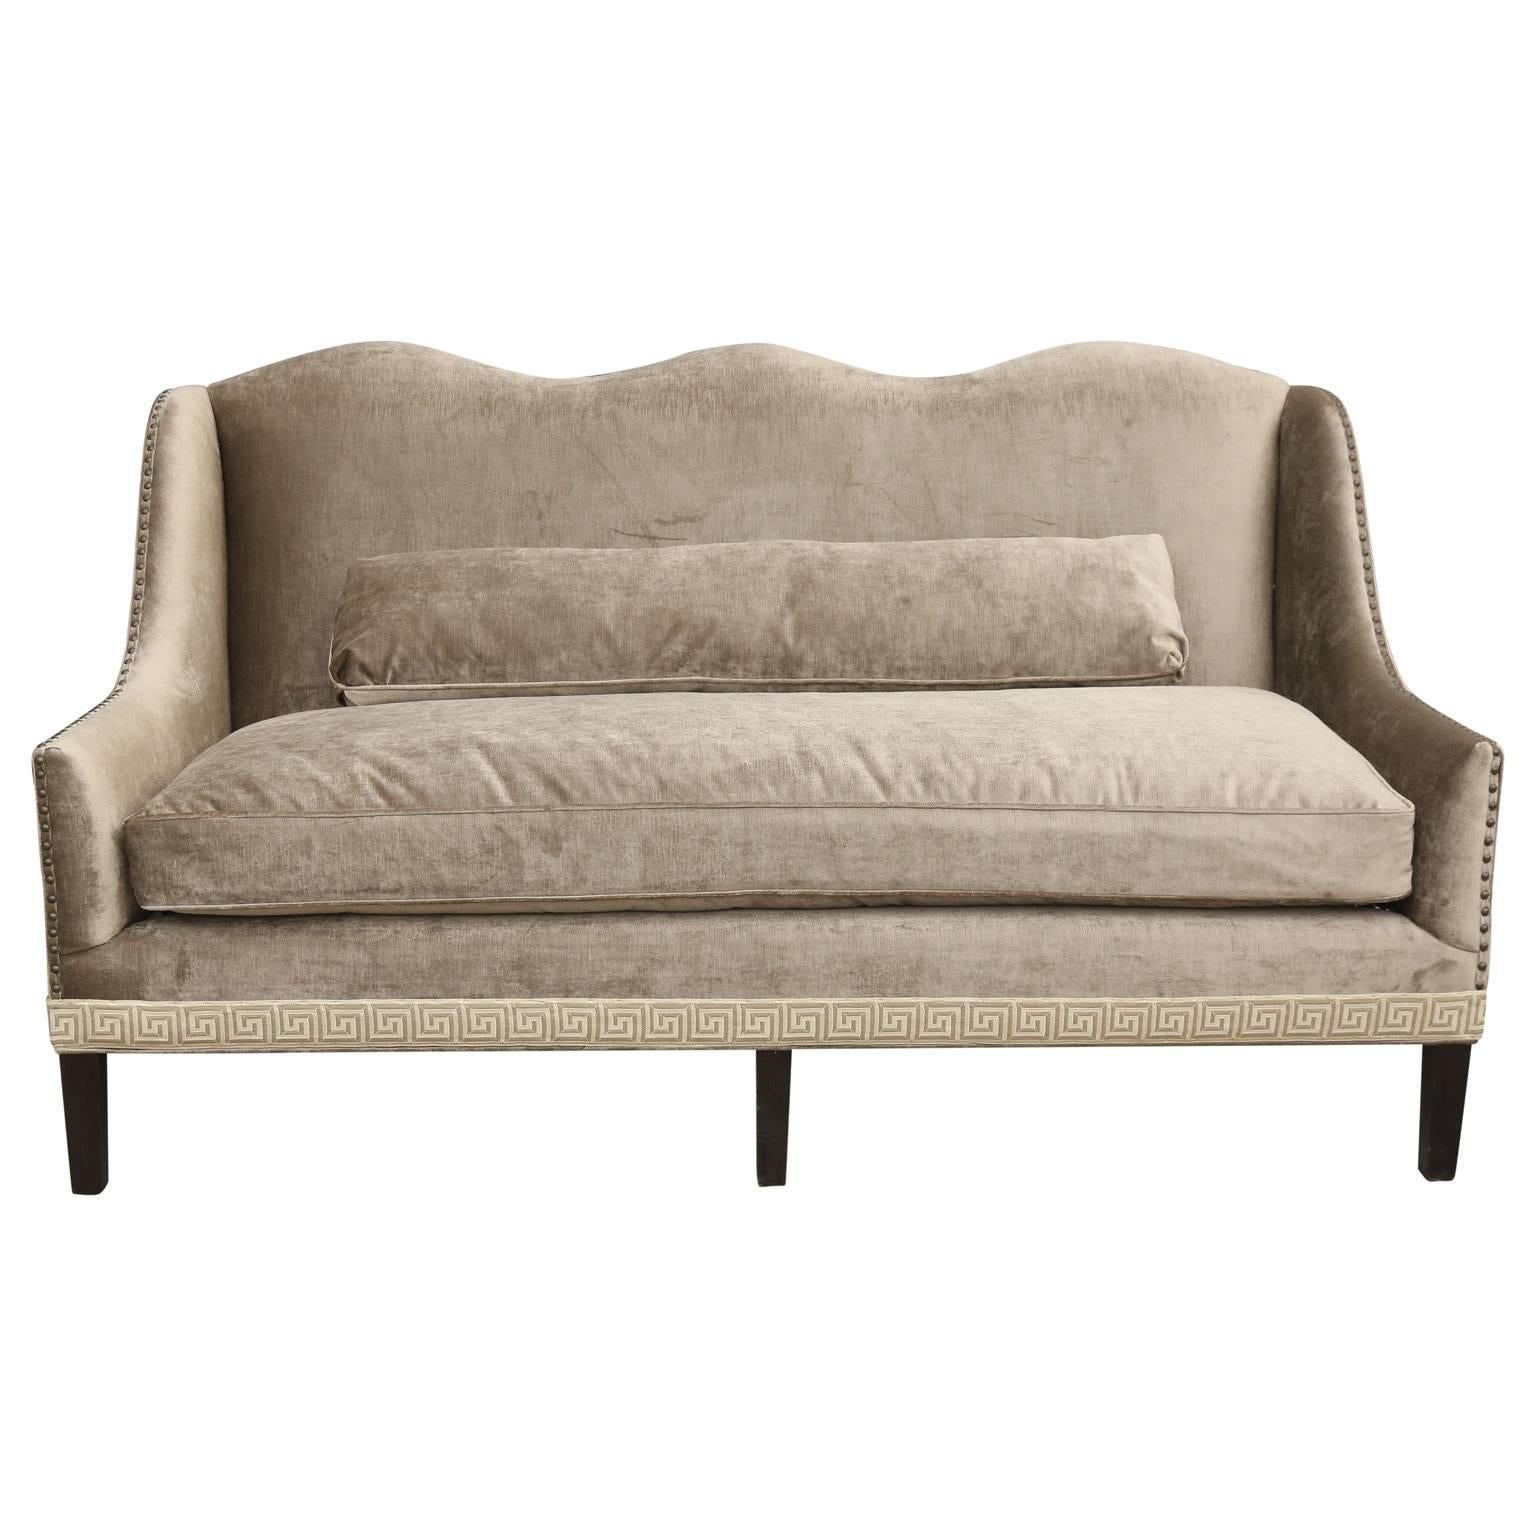 Classic vintage camel back sofa, newly-upholstered in a taupe-mushroom color velvet, and finished with nail heads and a Greek key tape trim. Seat measures 63 inches wide and 25 inches deep, with an arm height of 23 inches. Lumbar cushion is included.